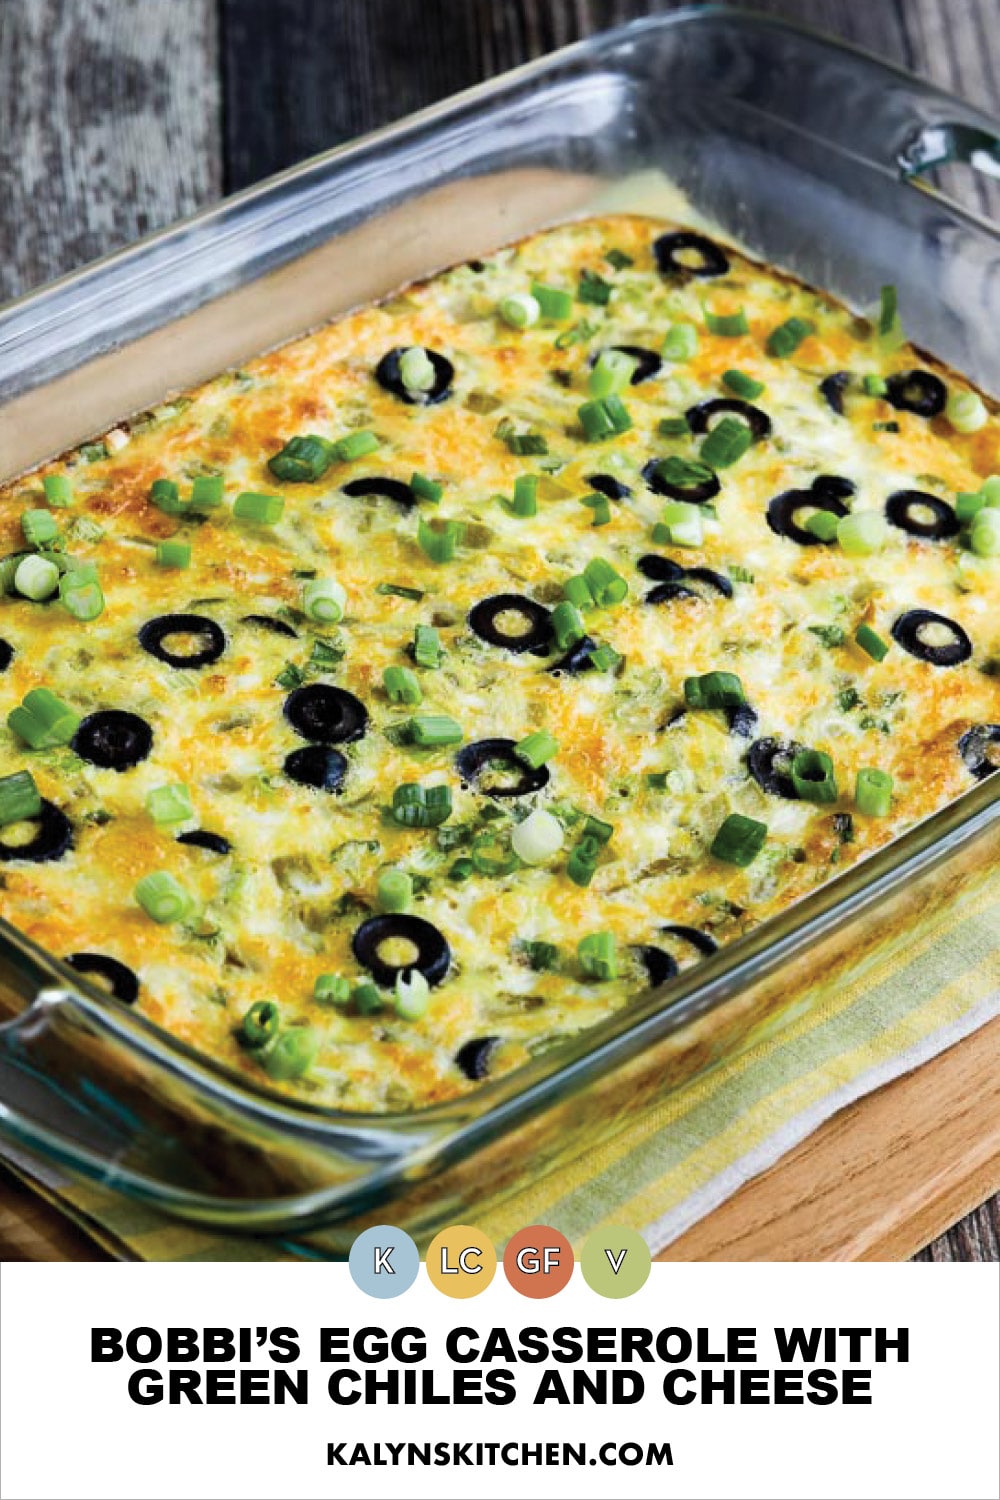 Pinterest image of Bobbi's Egg Casserole with Green Chiles and Cheese